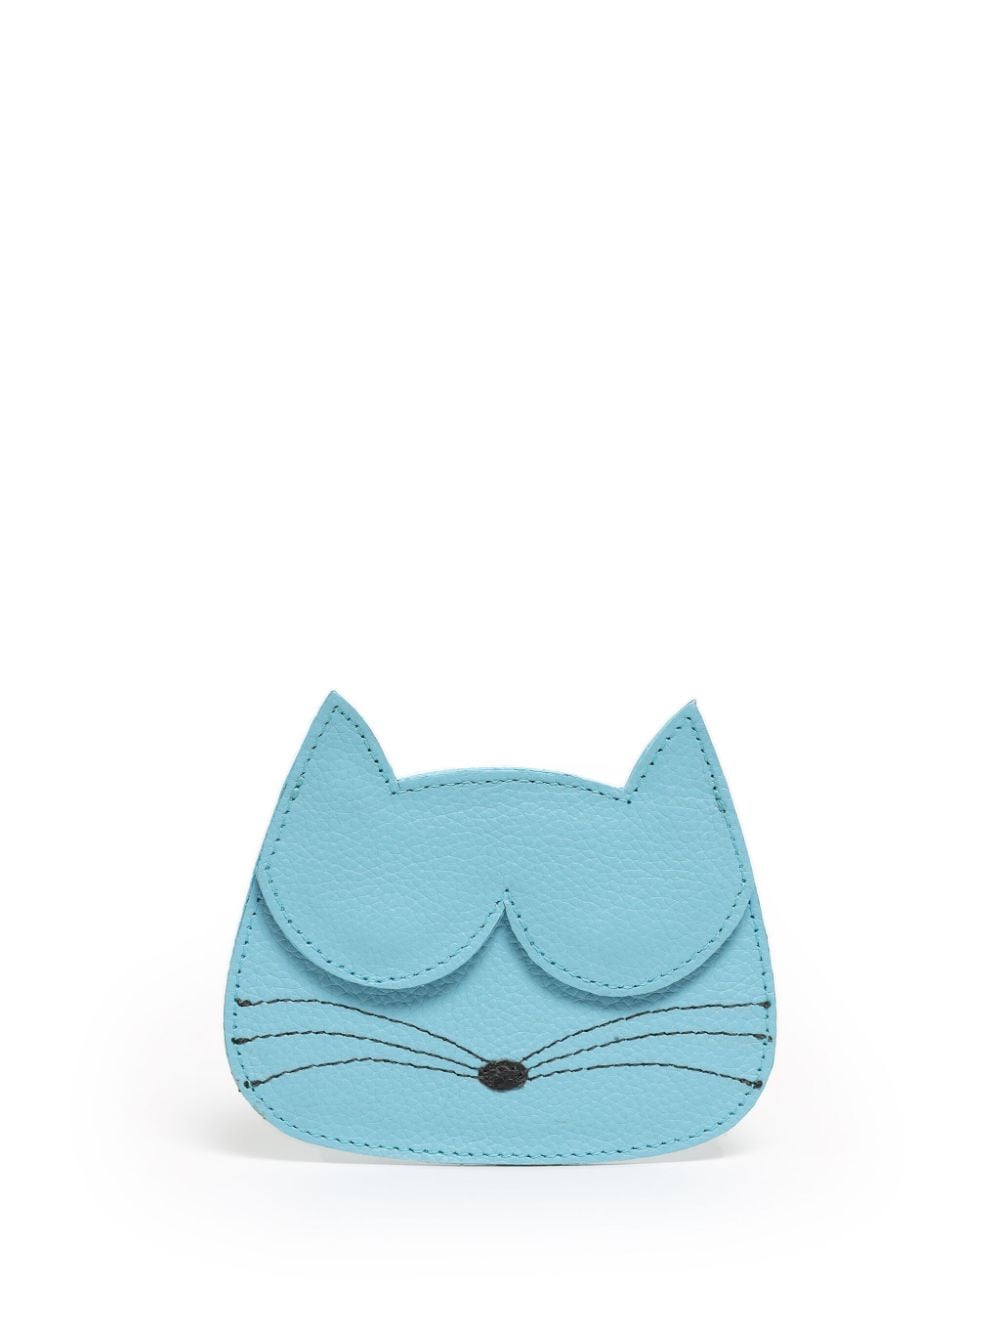 Sarah Chofakian Cat-shaped Leather Wallet In Blue